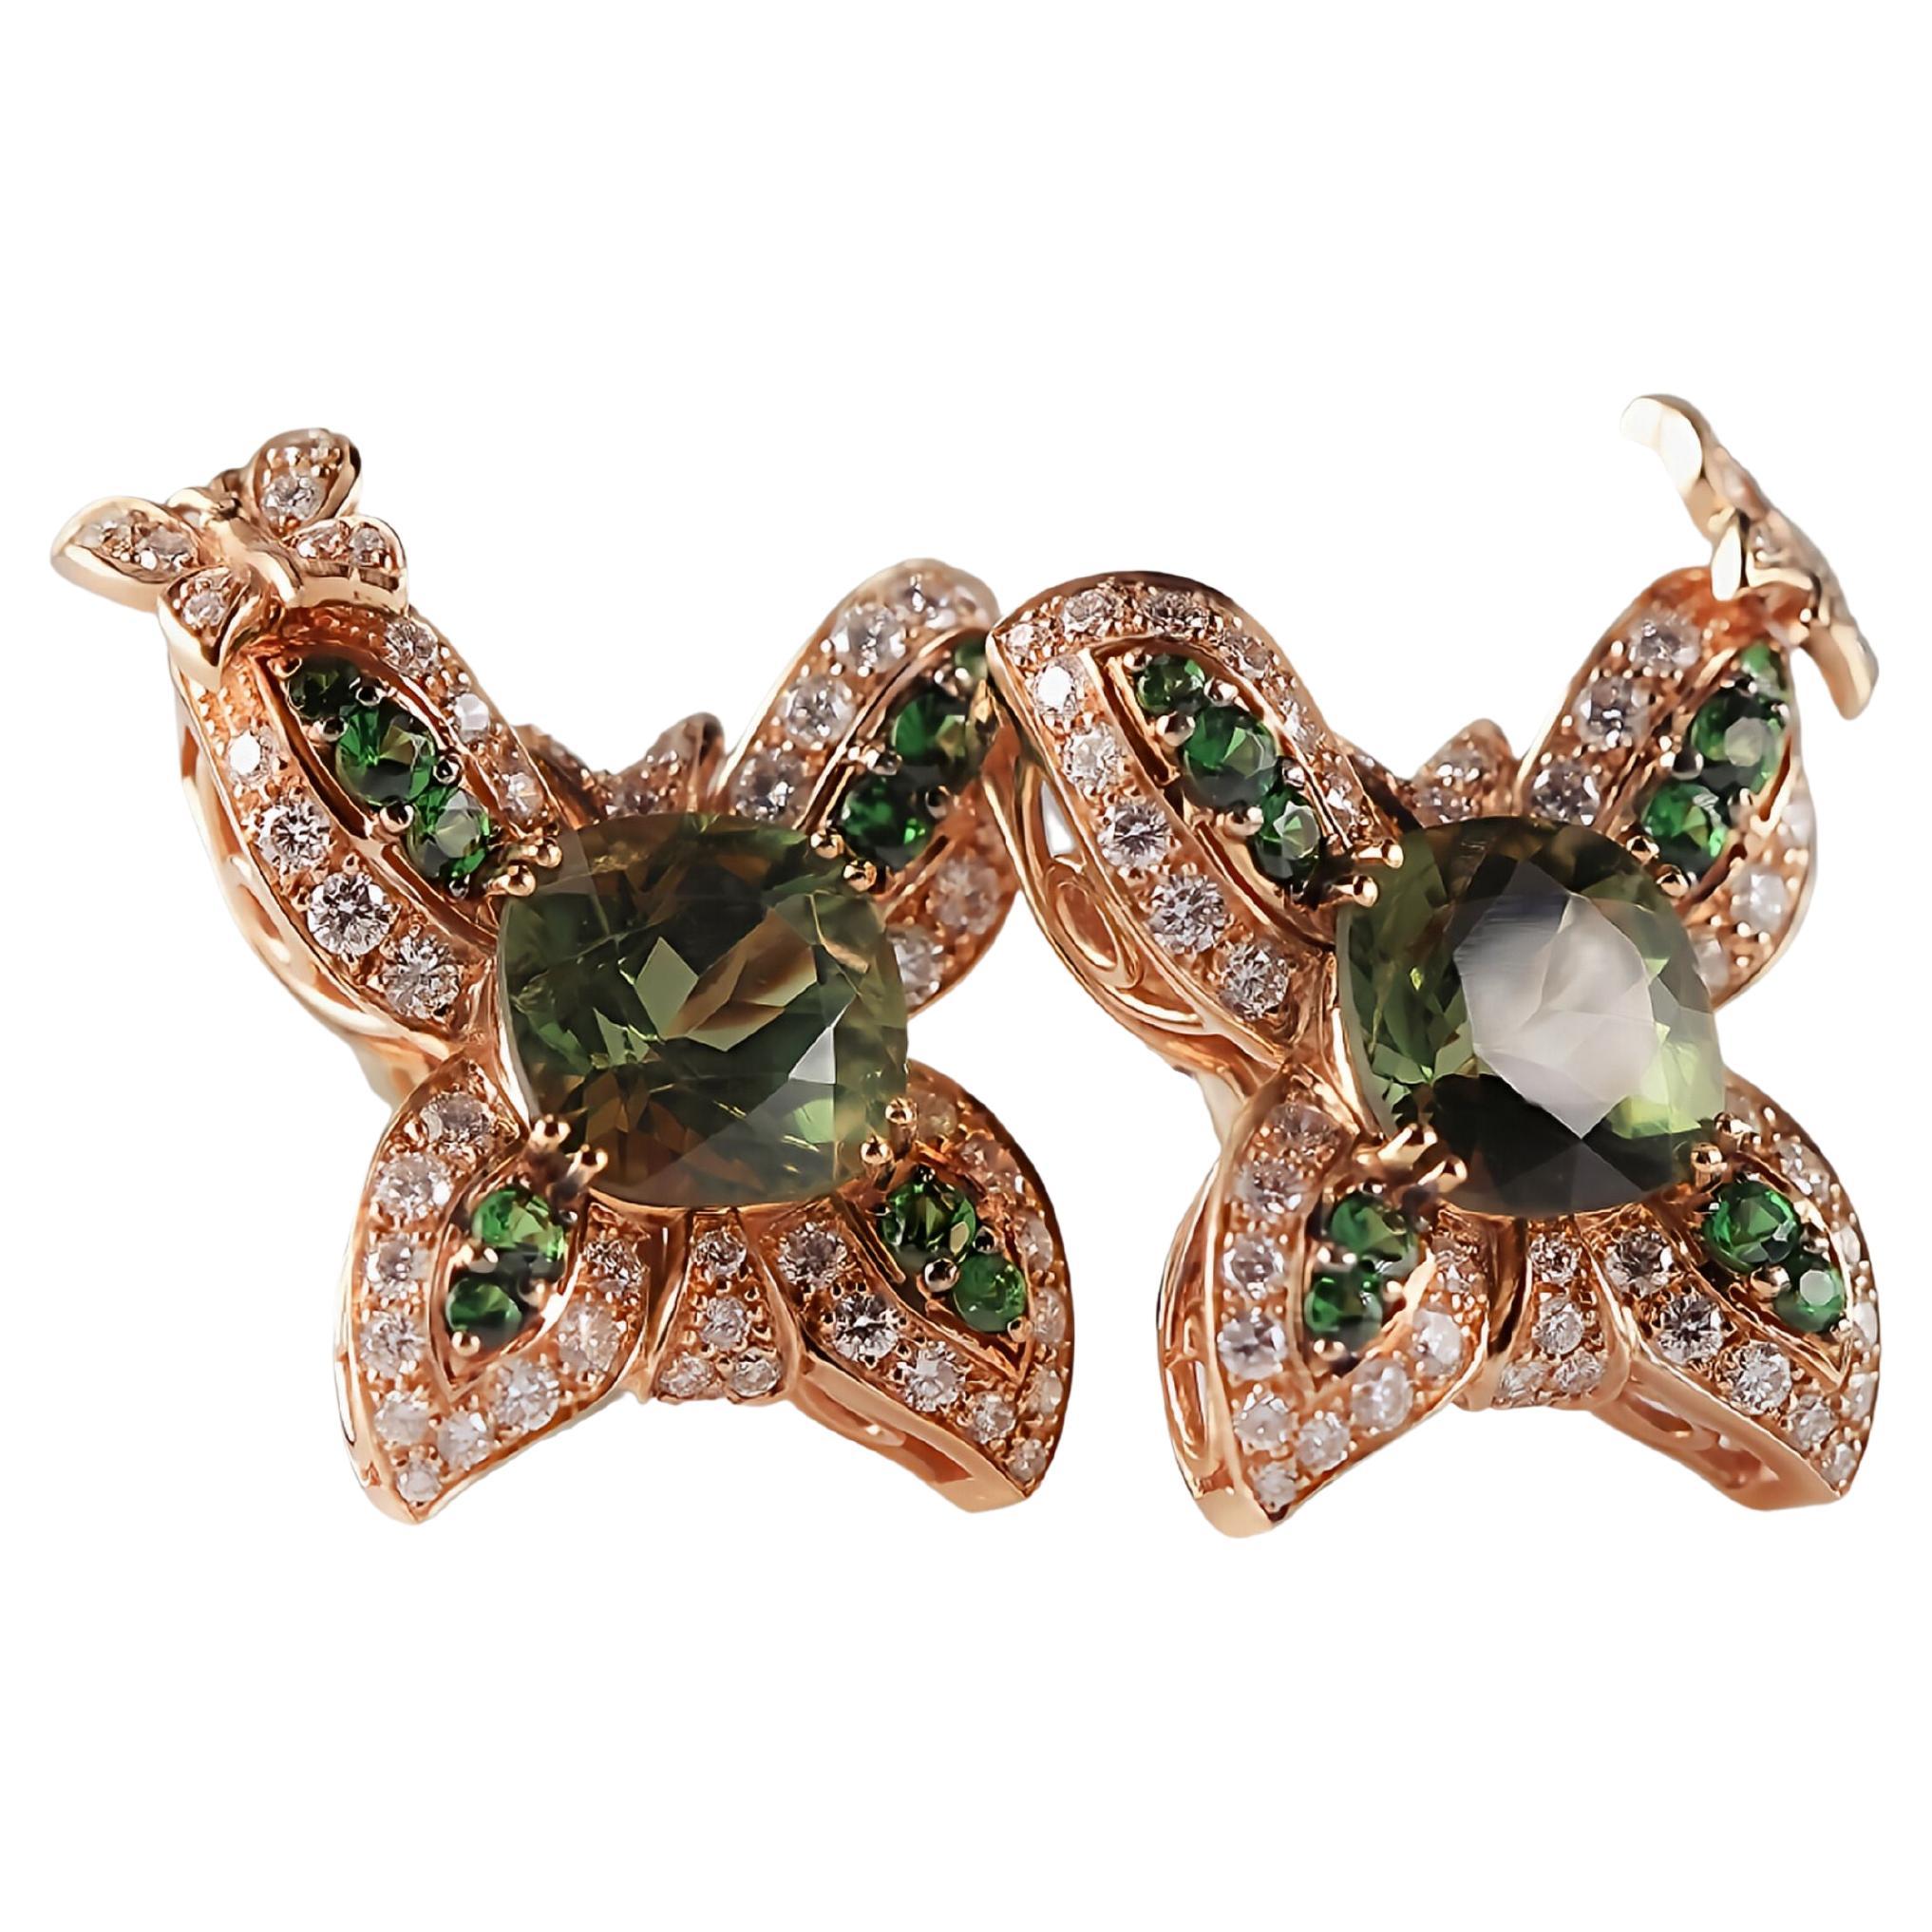 Sweet 18kt Rose Gold Earrings with Green Tourmalines, Diamonds, and Tsavorites For Sale